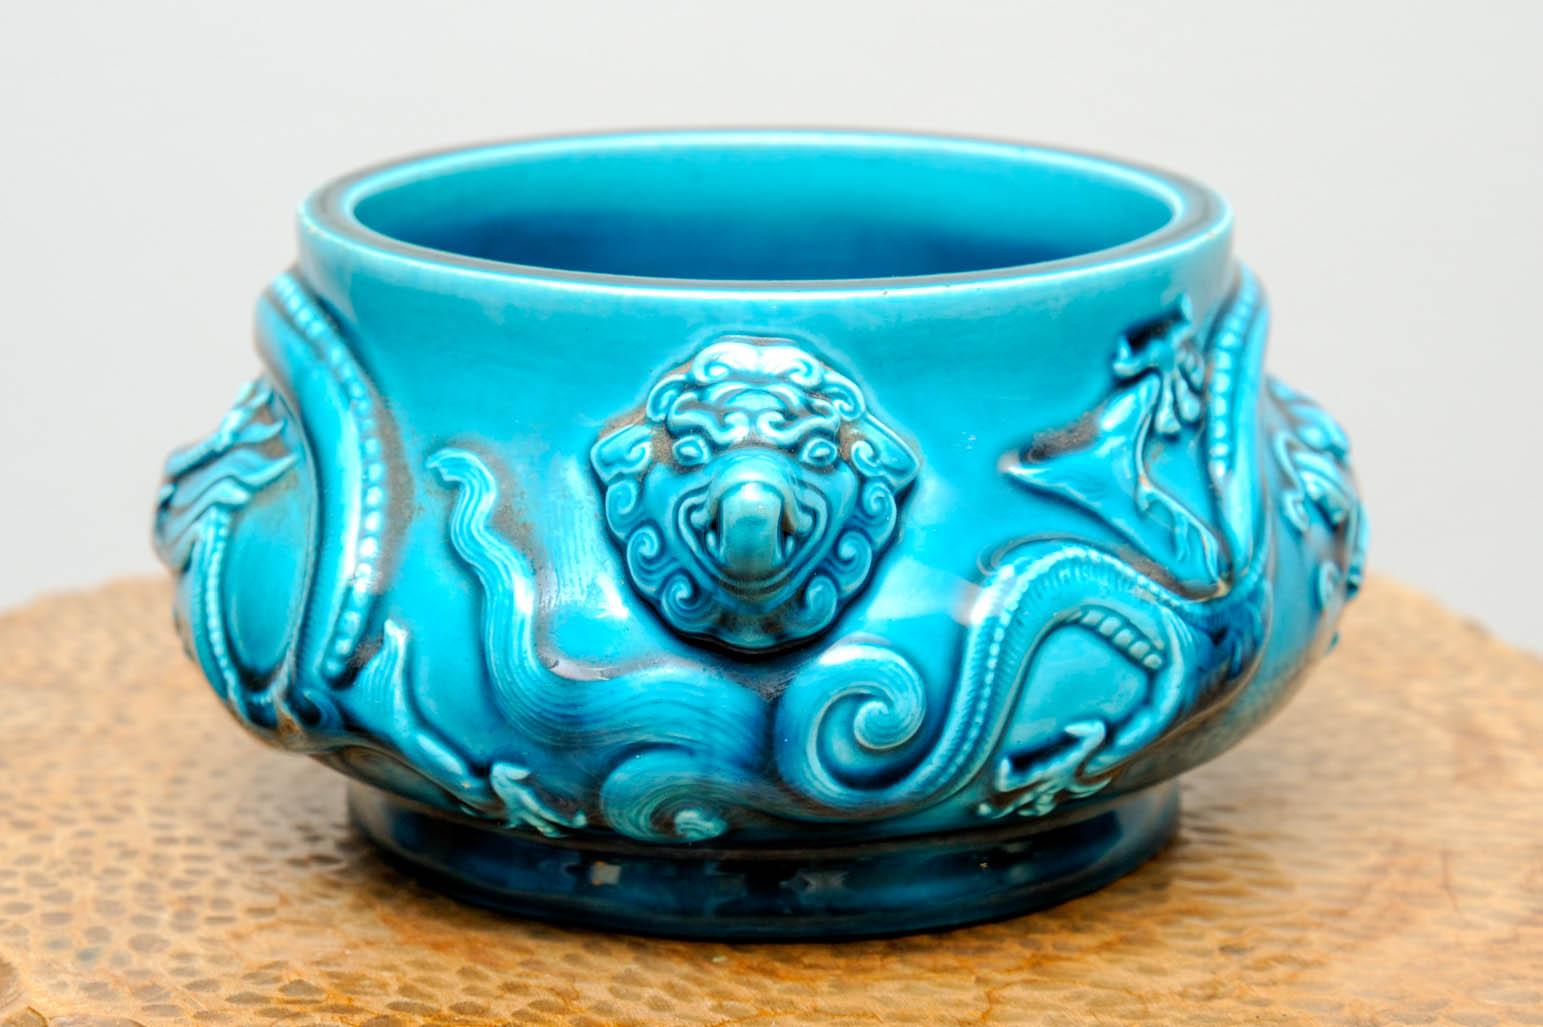 Late 19th Century Ceramic Bowl by Theodore Deck